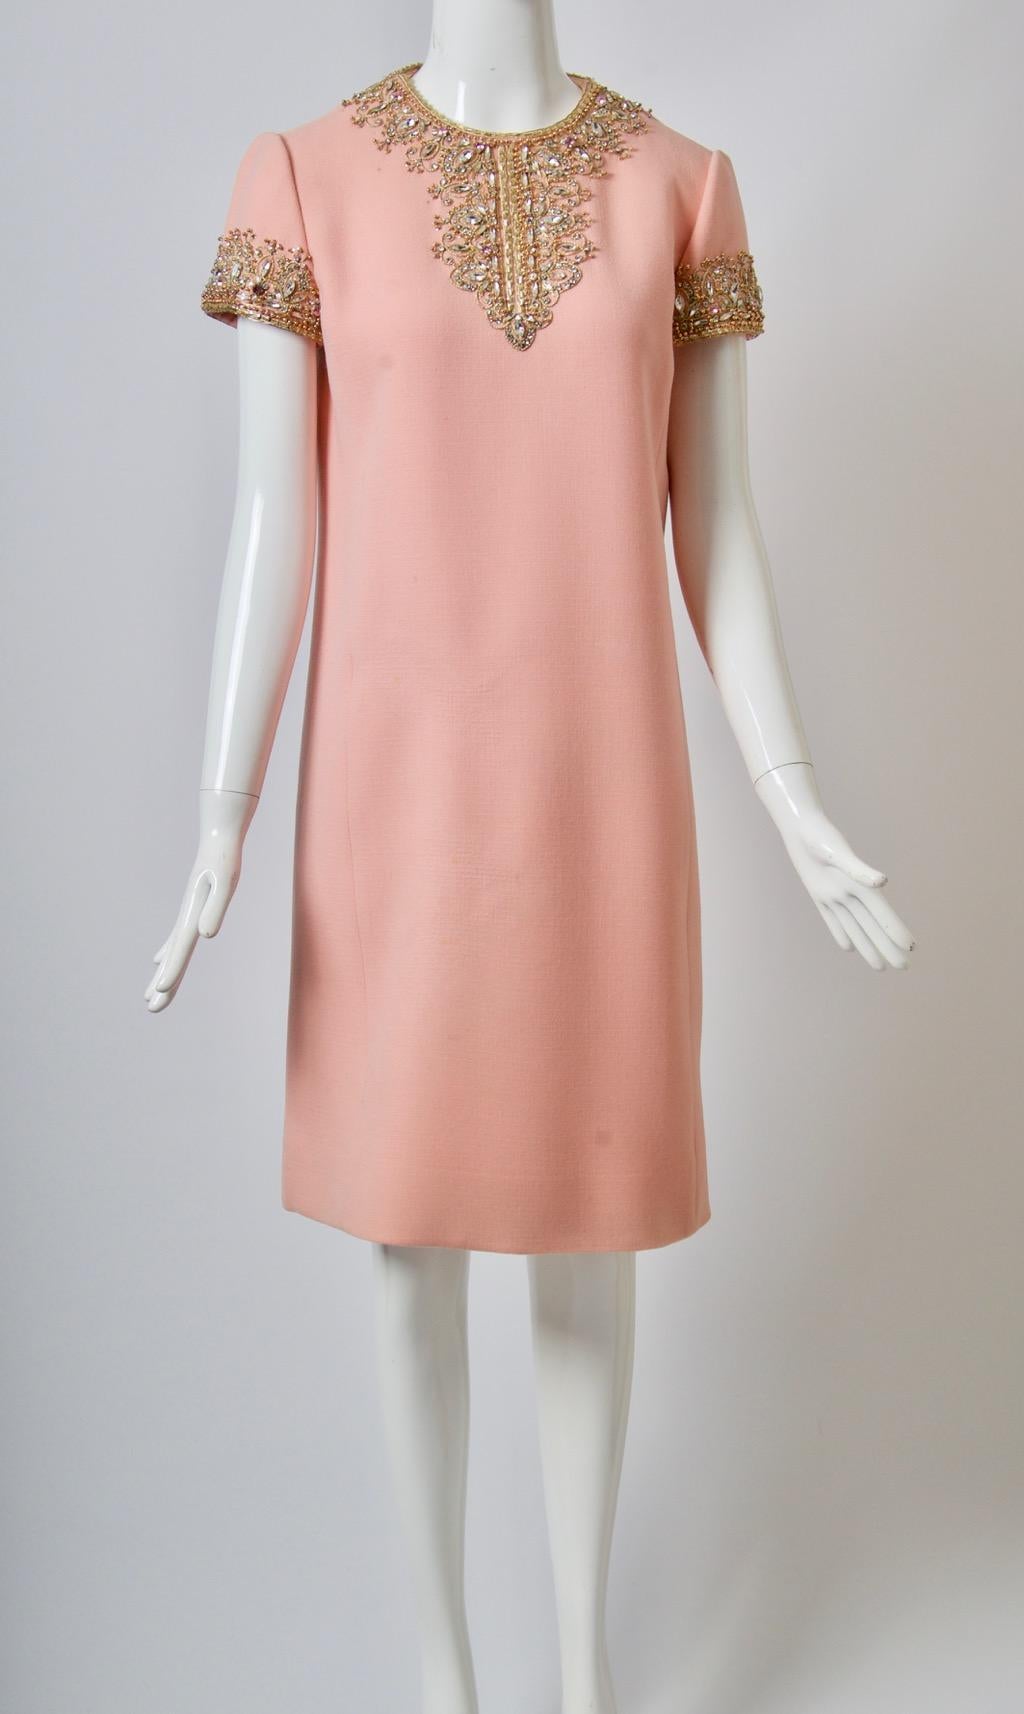 Pink wool crepe shift dress, the round neckline and short sleeves embellished with intricate beading consisting mostly of varied crystals and gold thread. The slightly A-line silhouette has front seaming from the underarm to the hem. Lined in pale